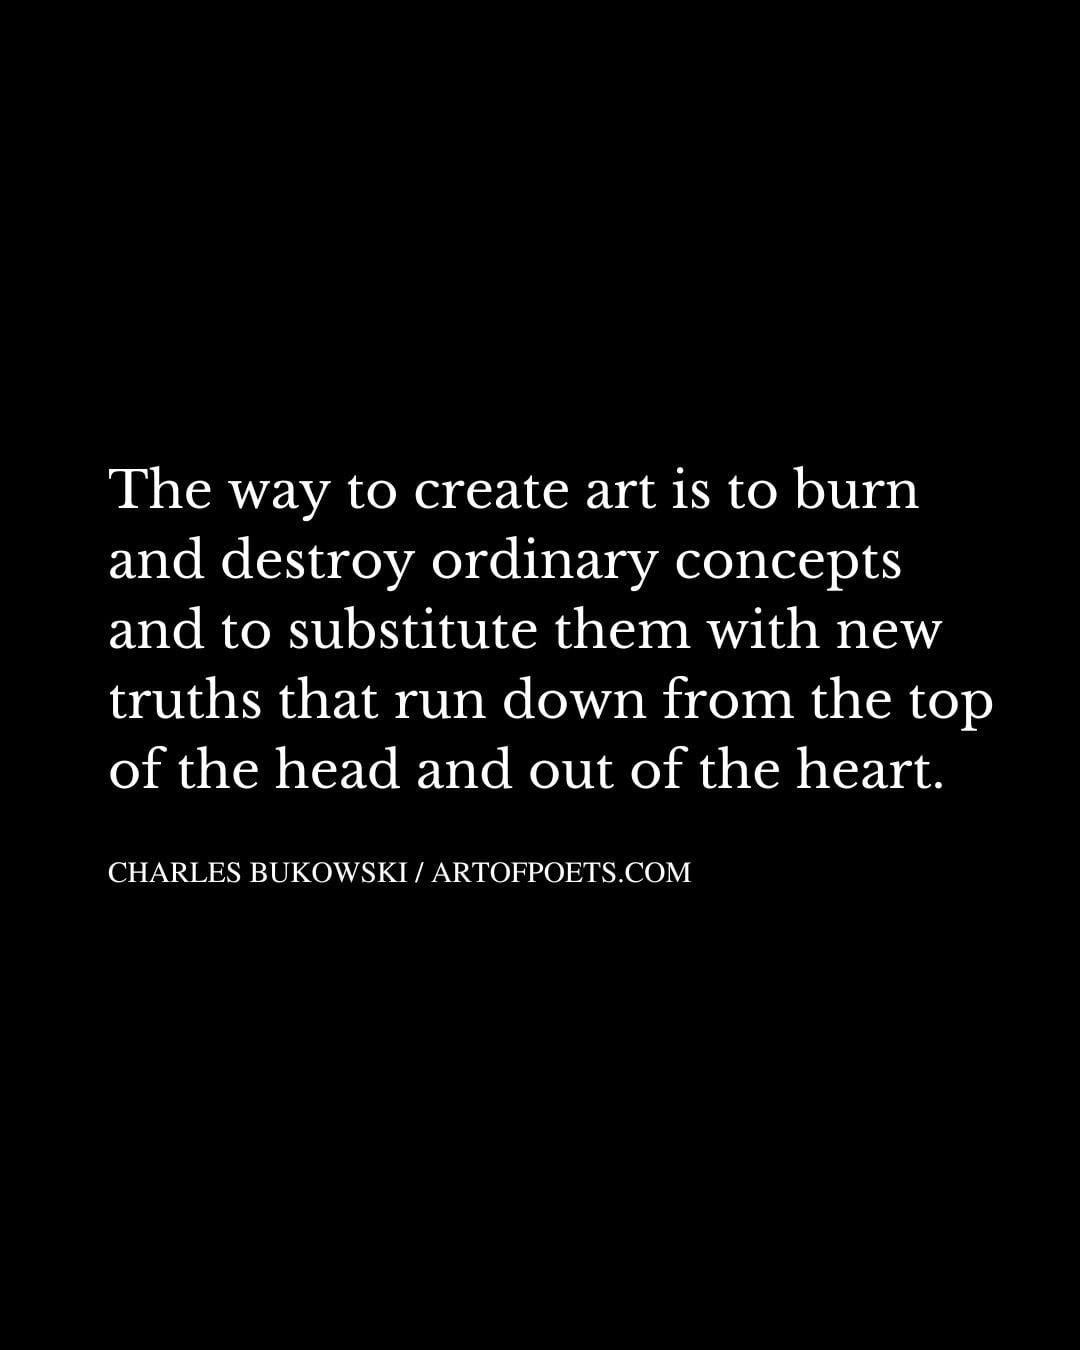 The way to create art is to burn and destroy ordinary concepts and to substitute them with new truths that run down from the top of the head and out of the heart